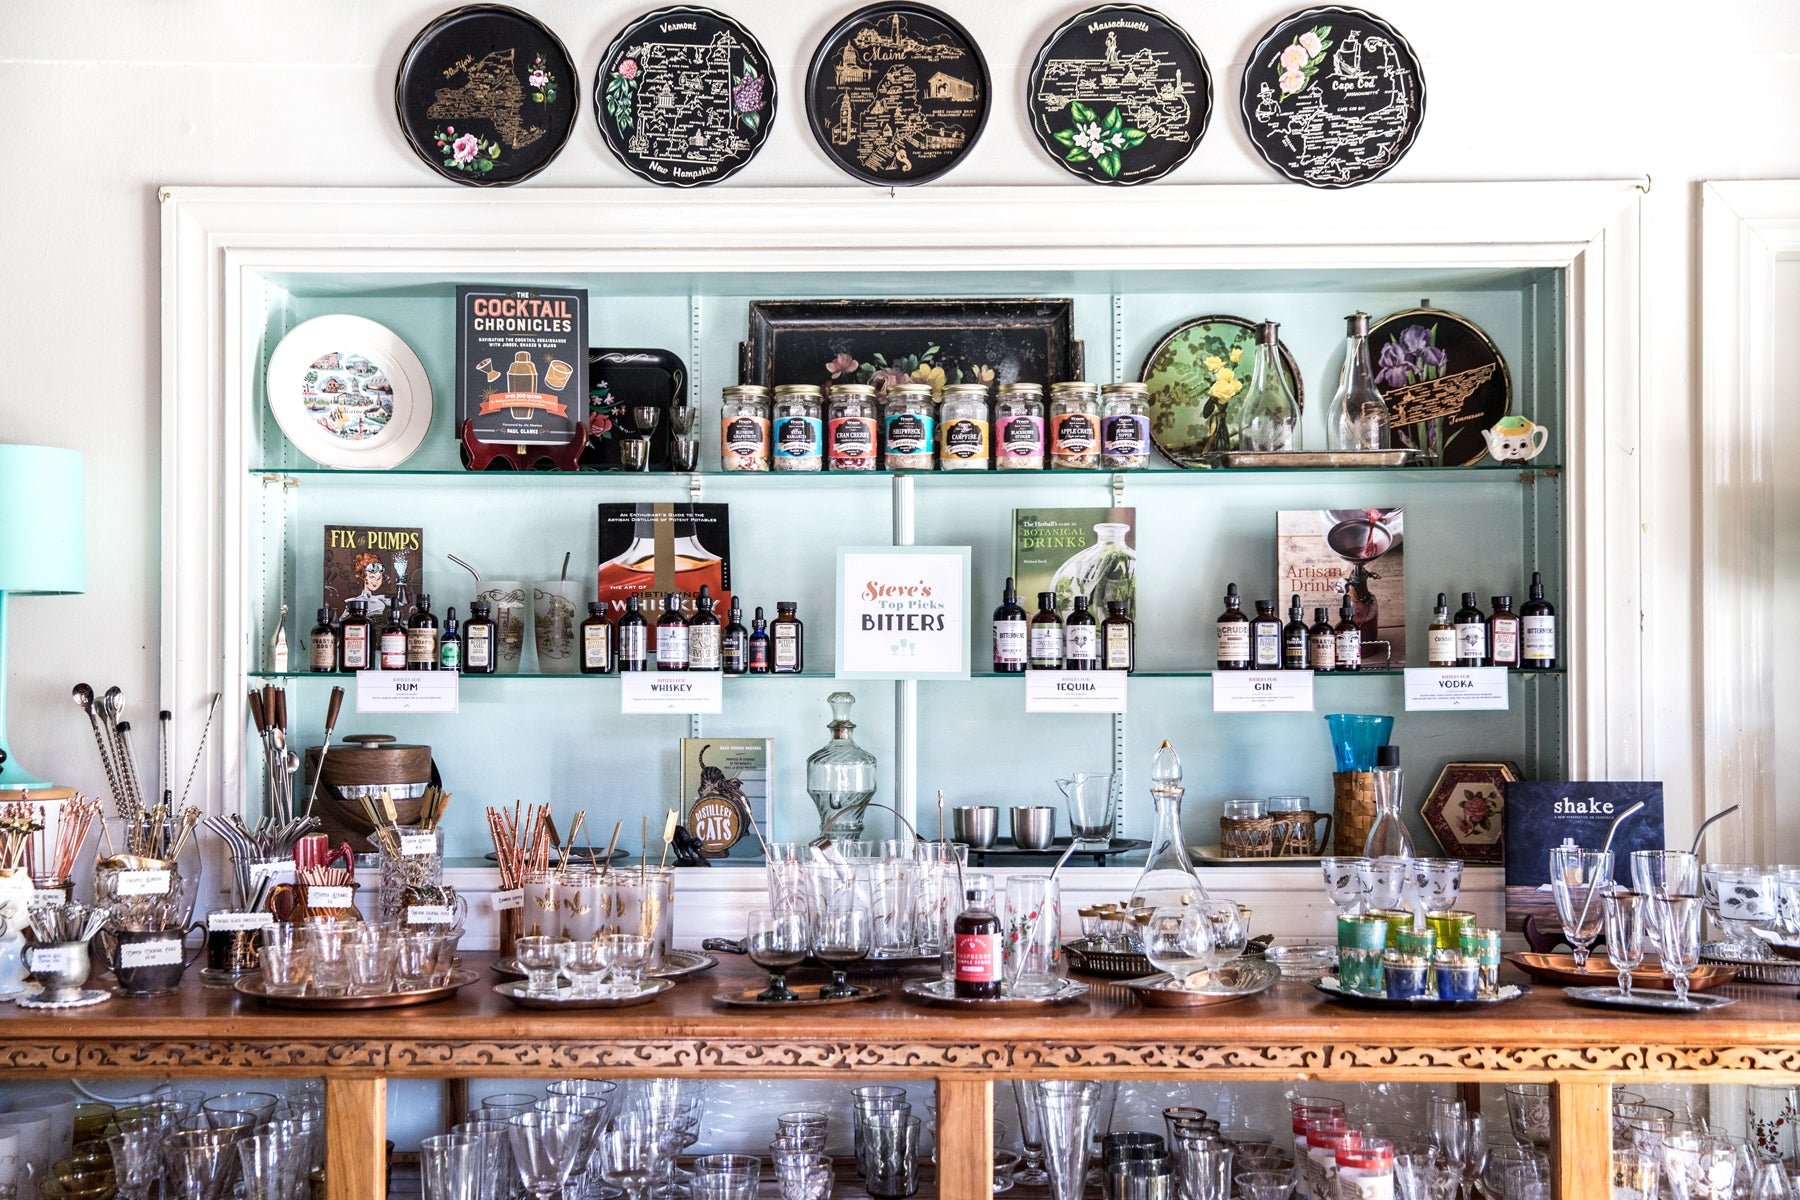 Wide shot of a retail display featuring shelves of cocktail ingredients, glassware, bar accessories, and vintage fixtures.